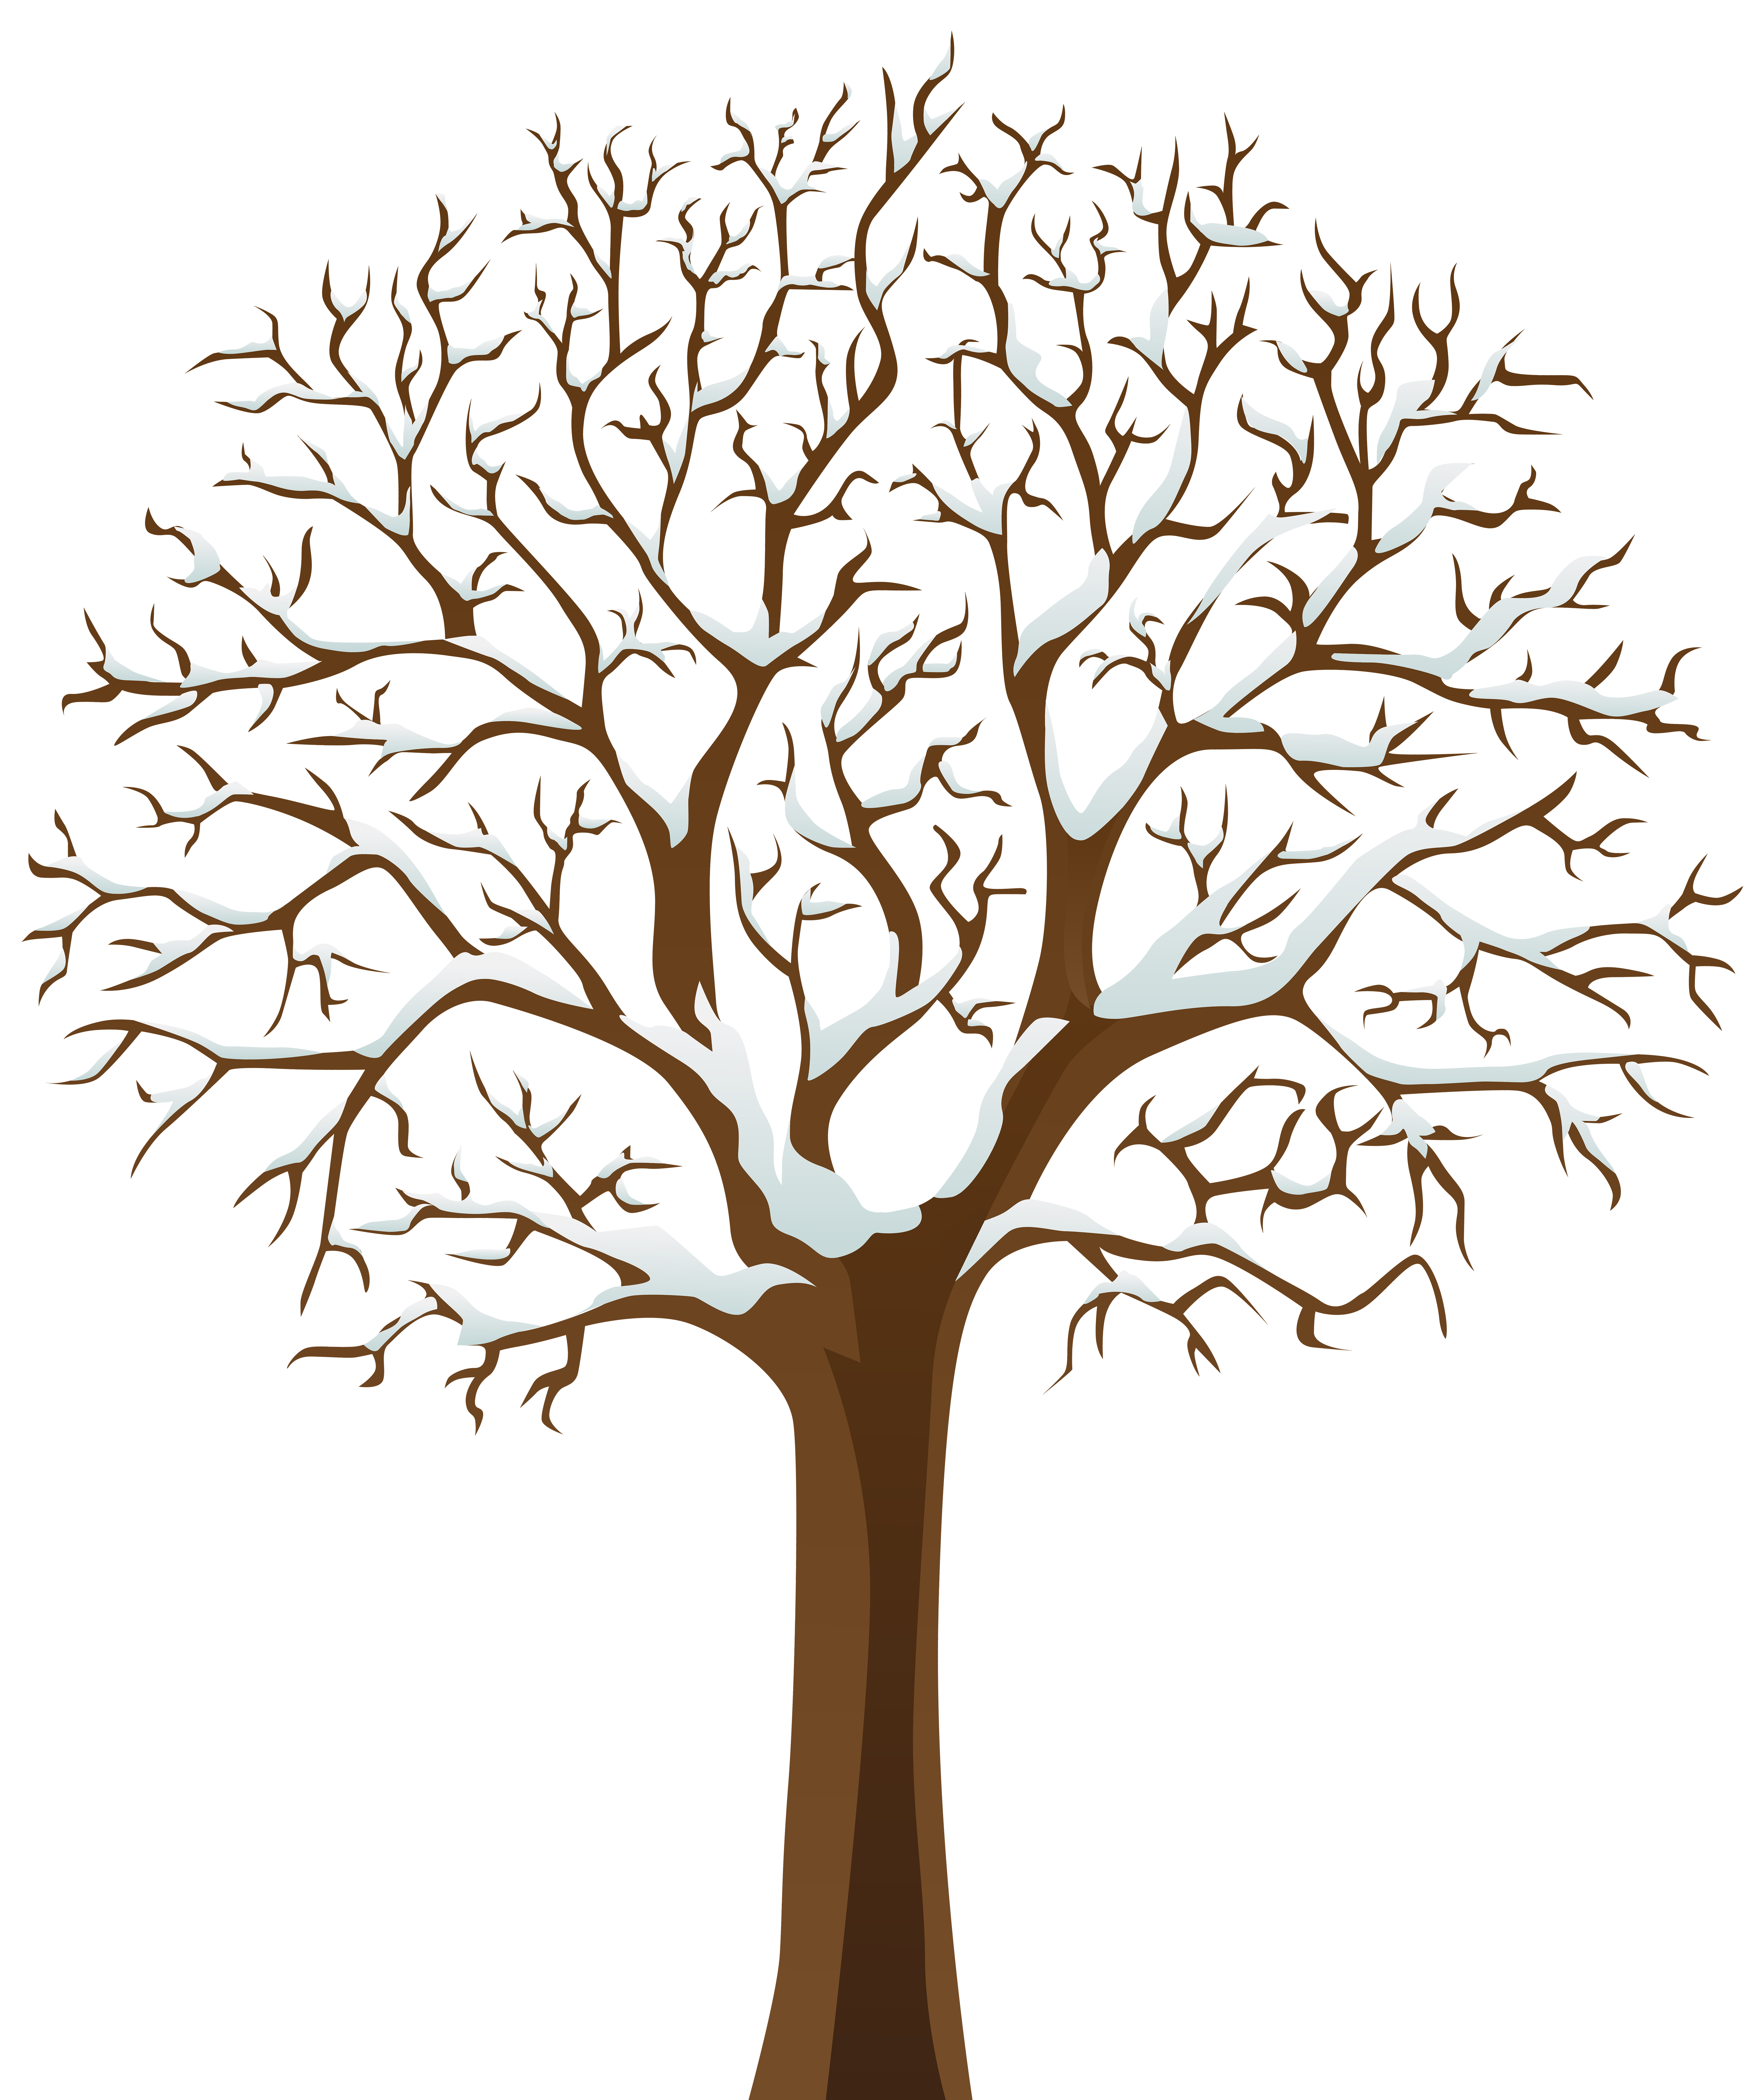 Trees silhouette at getdrawings. Clipart tree winter